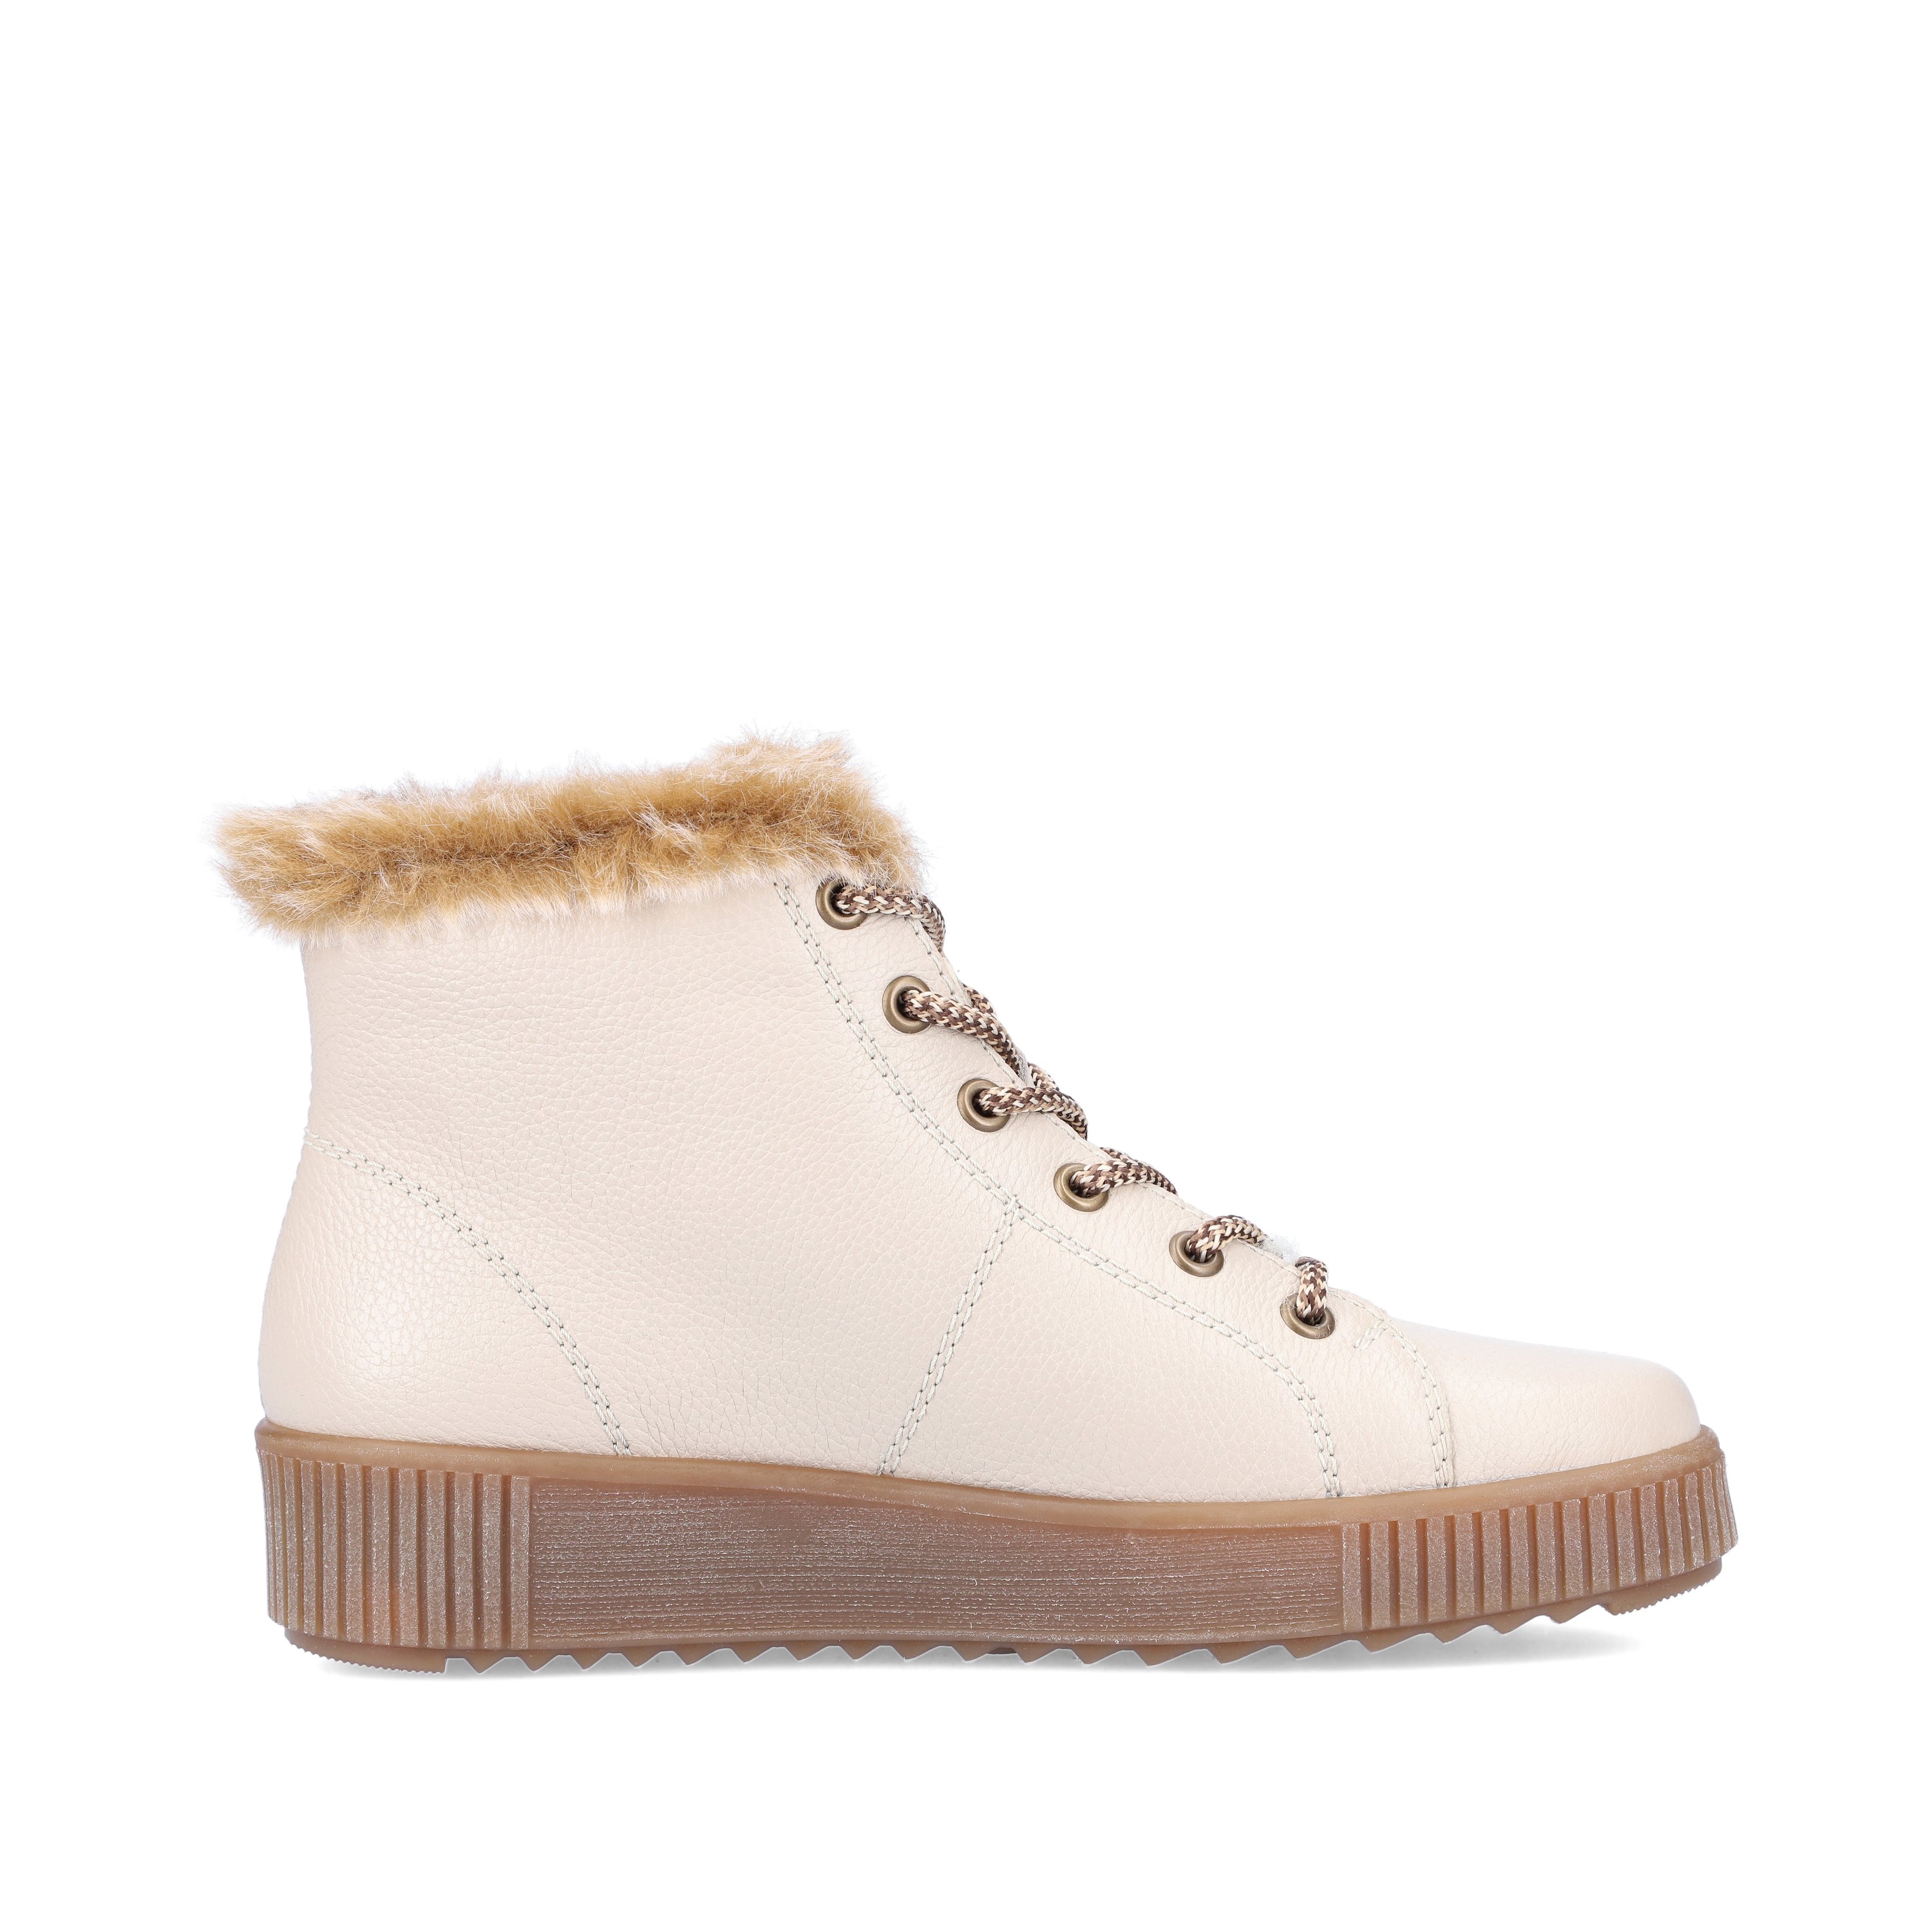 Cinnamon white remonte women´s lace-up boots R7980-80 with lacing and zipper. Shoe inside